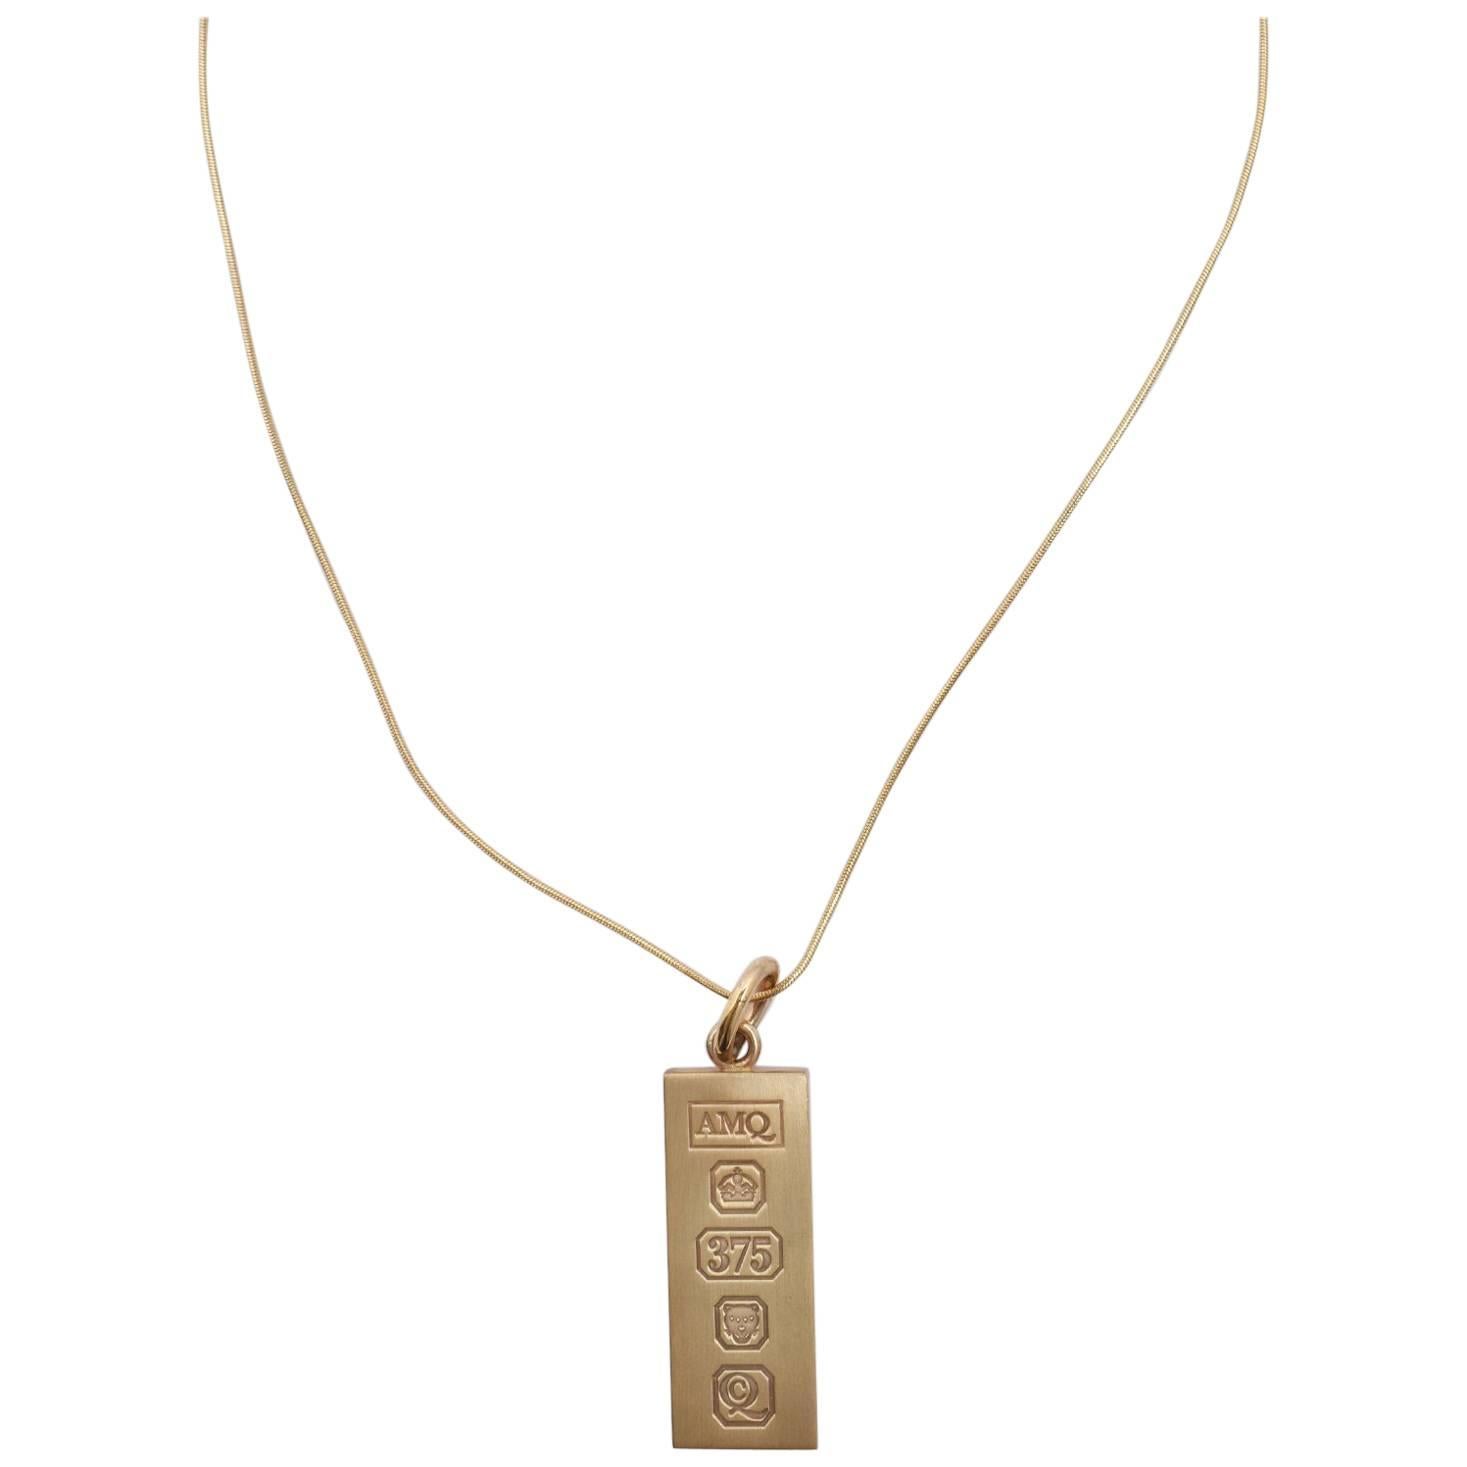 Shaun Leane for Alexander McQueen Gold Tag Pendant Necklace with Hallmark Design For Sale